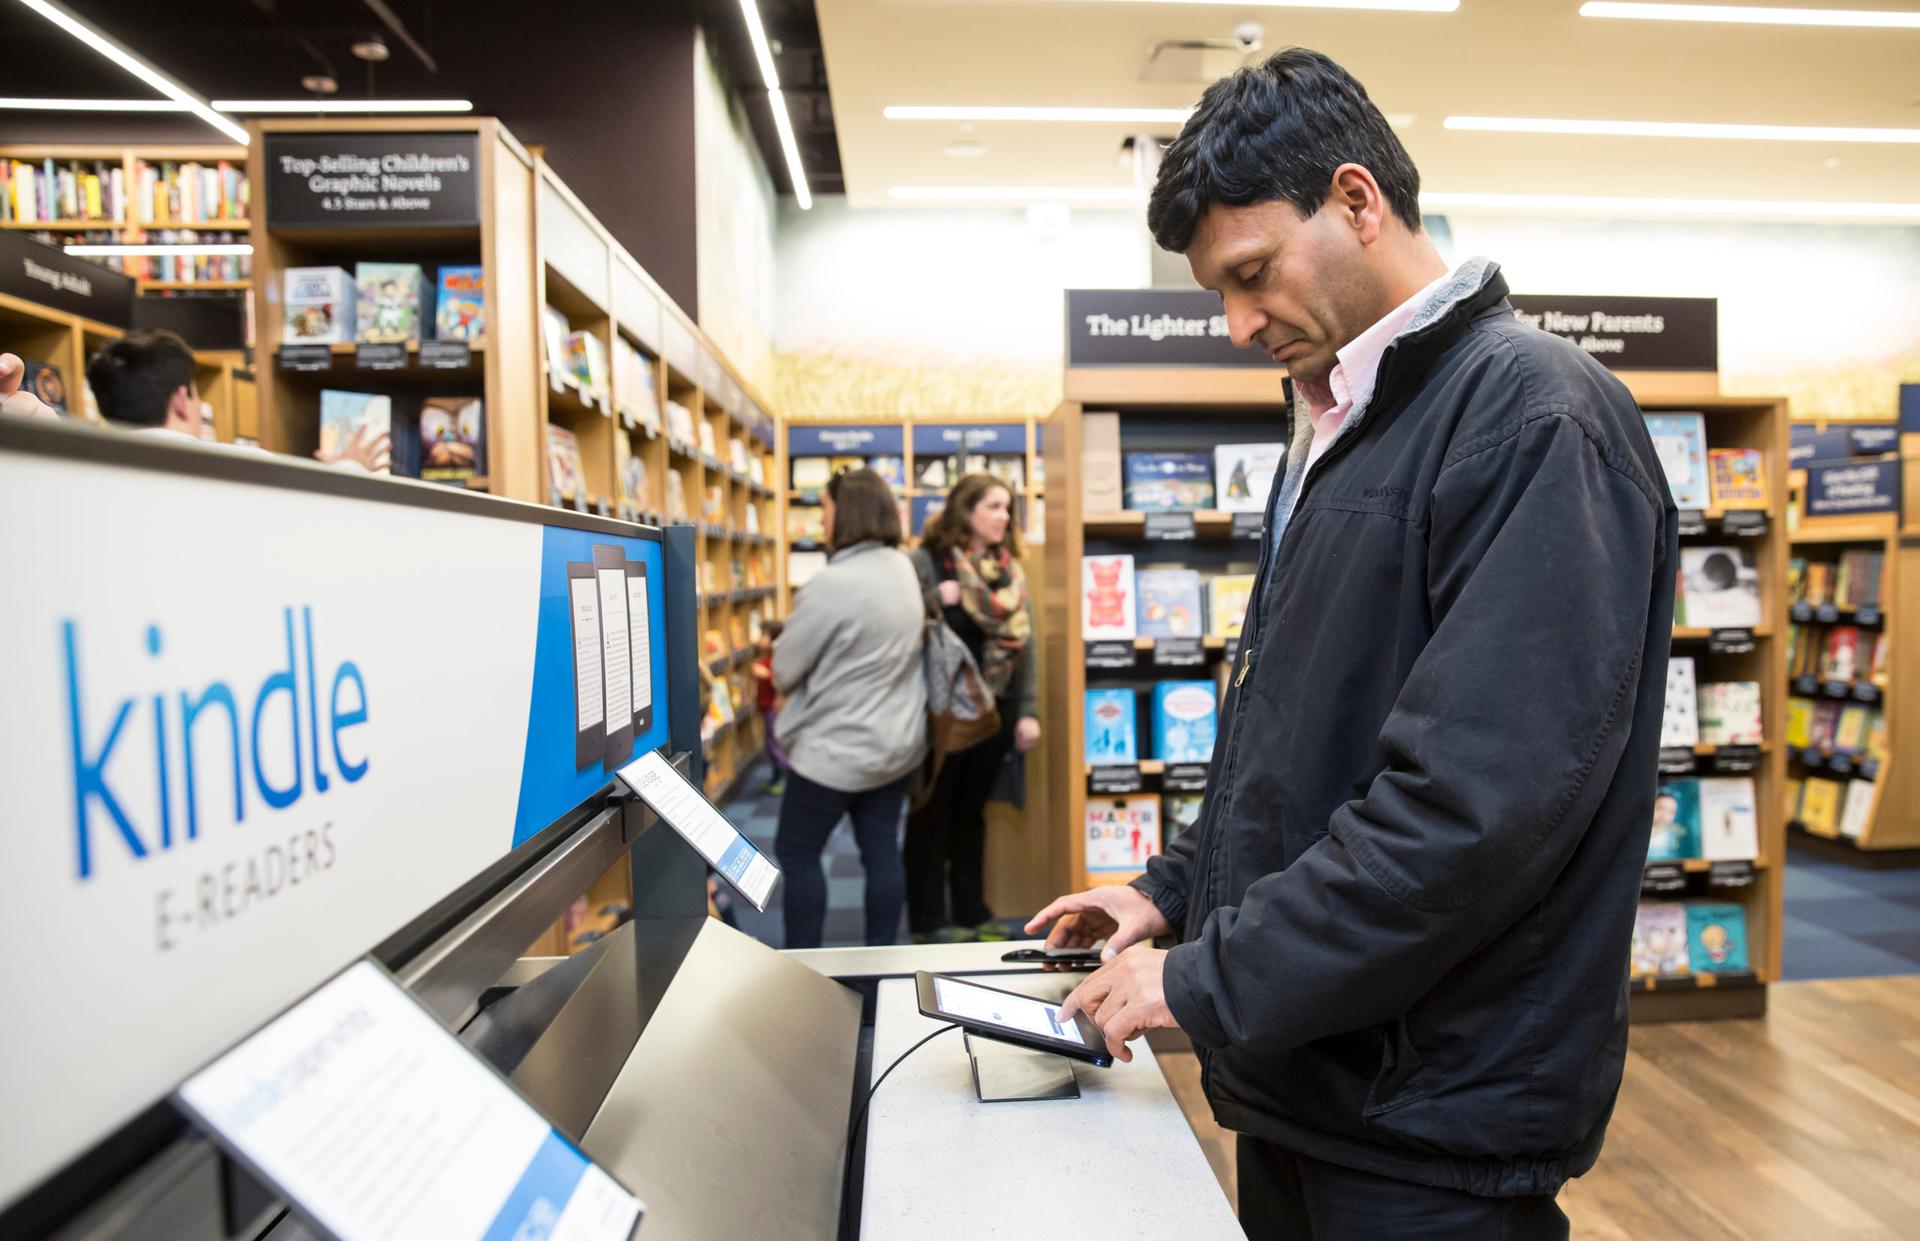 A customer uses a Kindle tablet device at the newly opened Amazon Books store on Nov. 4, 2015, in Seattle. (Stephen Brashear/Getty Images)